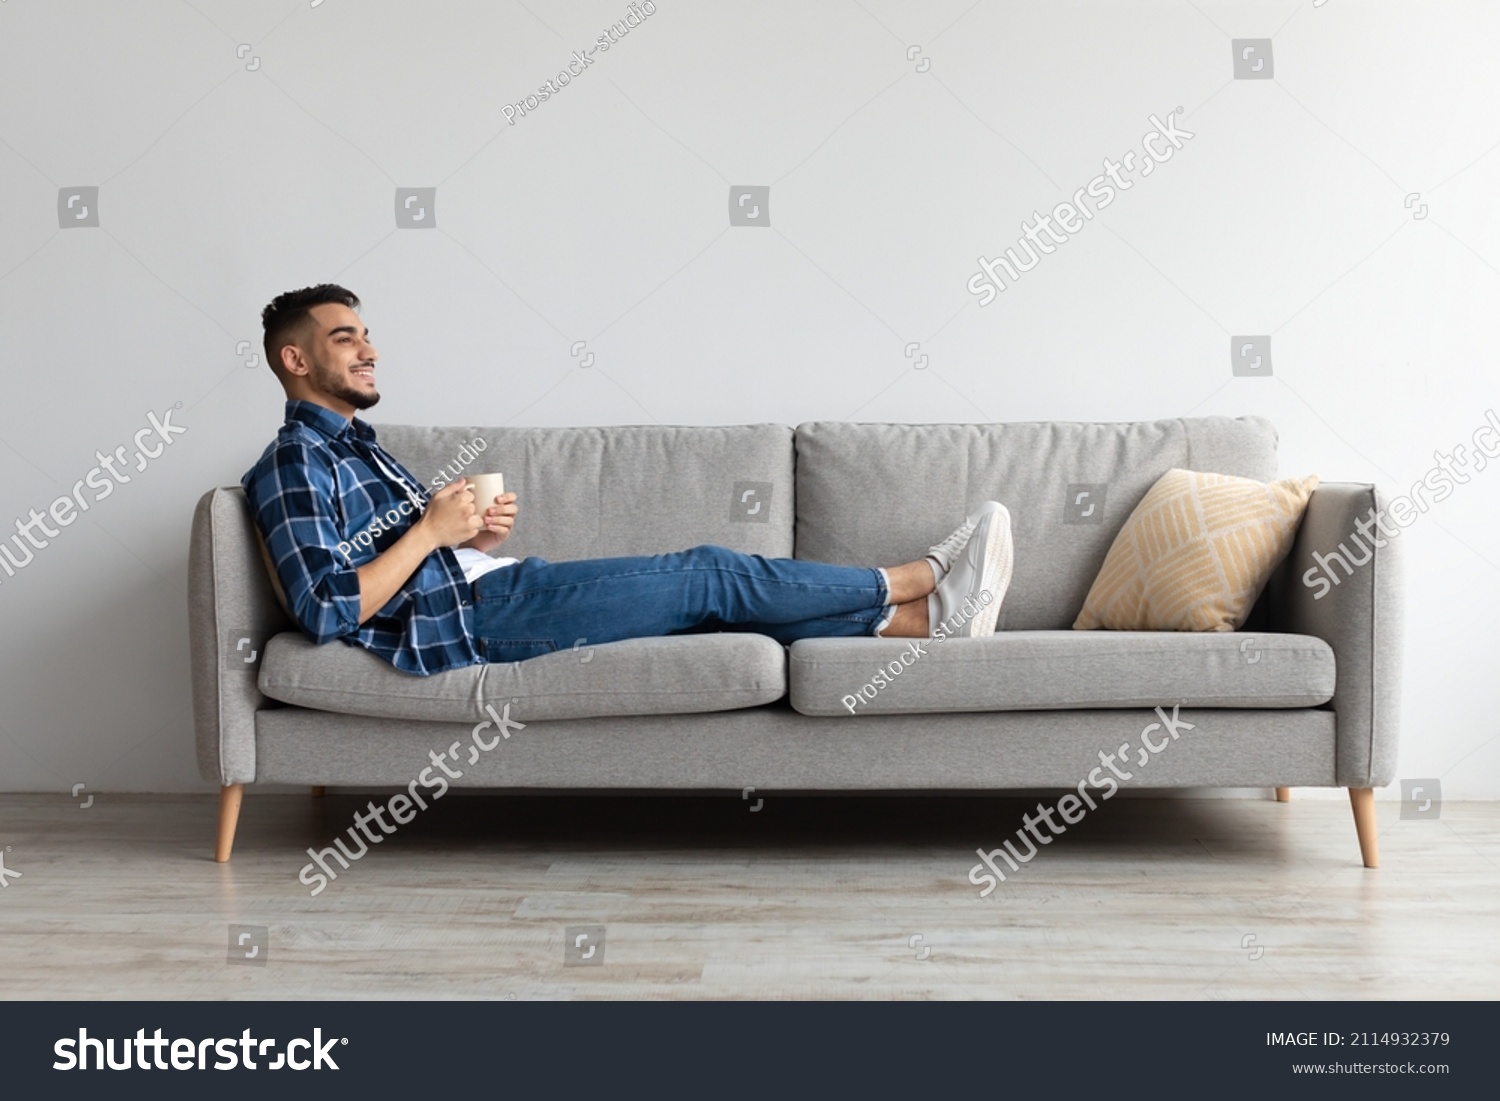 Rest Concept. Happy Arab guy drinking coffee sitting on comfortable couch at home in living room. Cheerful casual man relaxing on sofa, enjoying weekend free time or break from work, full body length #2114932379